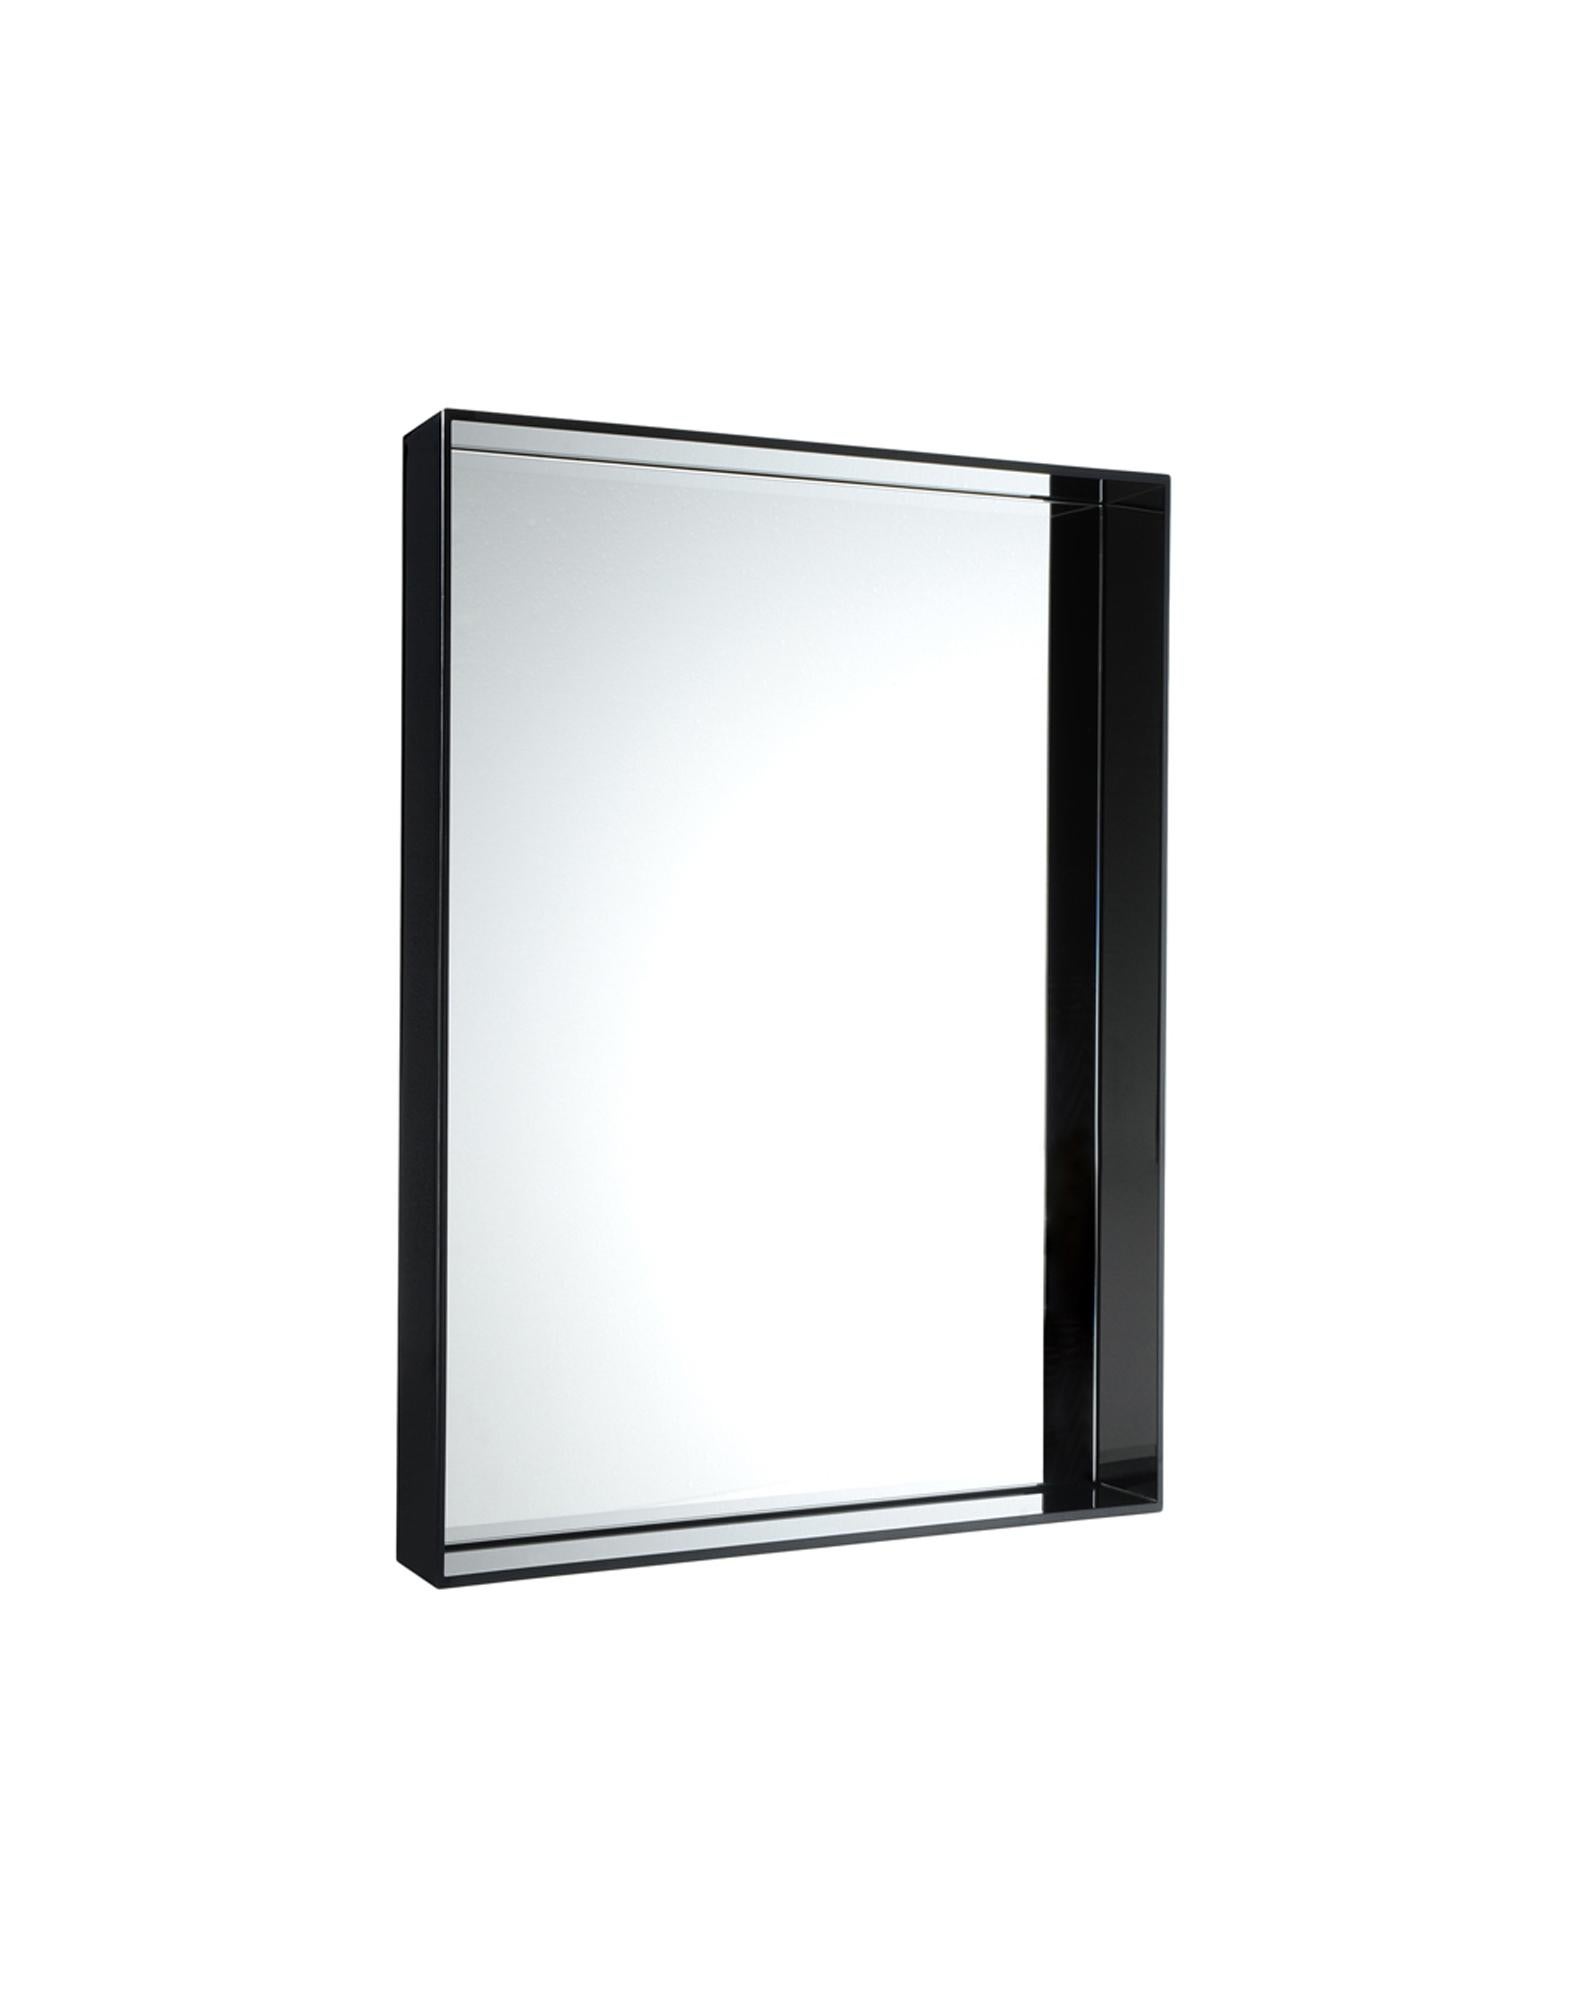 Only Me reflects the narcissist in each of us. Designed by Starck, Only Me is a mirror with a slender 8-cm frame. Only Me in square that can be hung in either direction: 50 x 50 cm.

Dimensions: Height 27.5 in.; width 19.63 in.; depth 3.5 in. unit